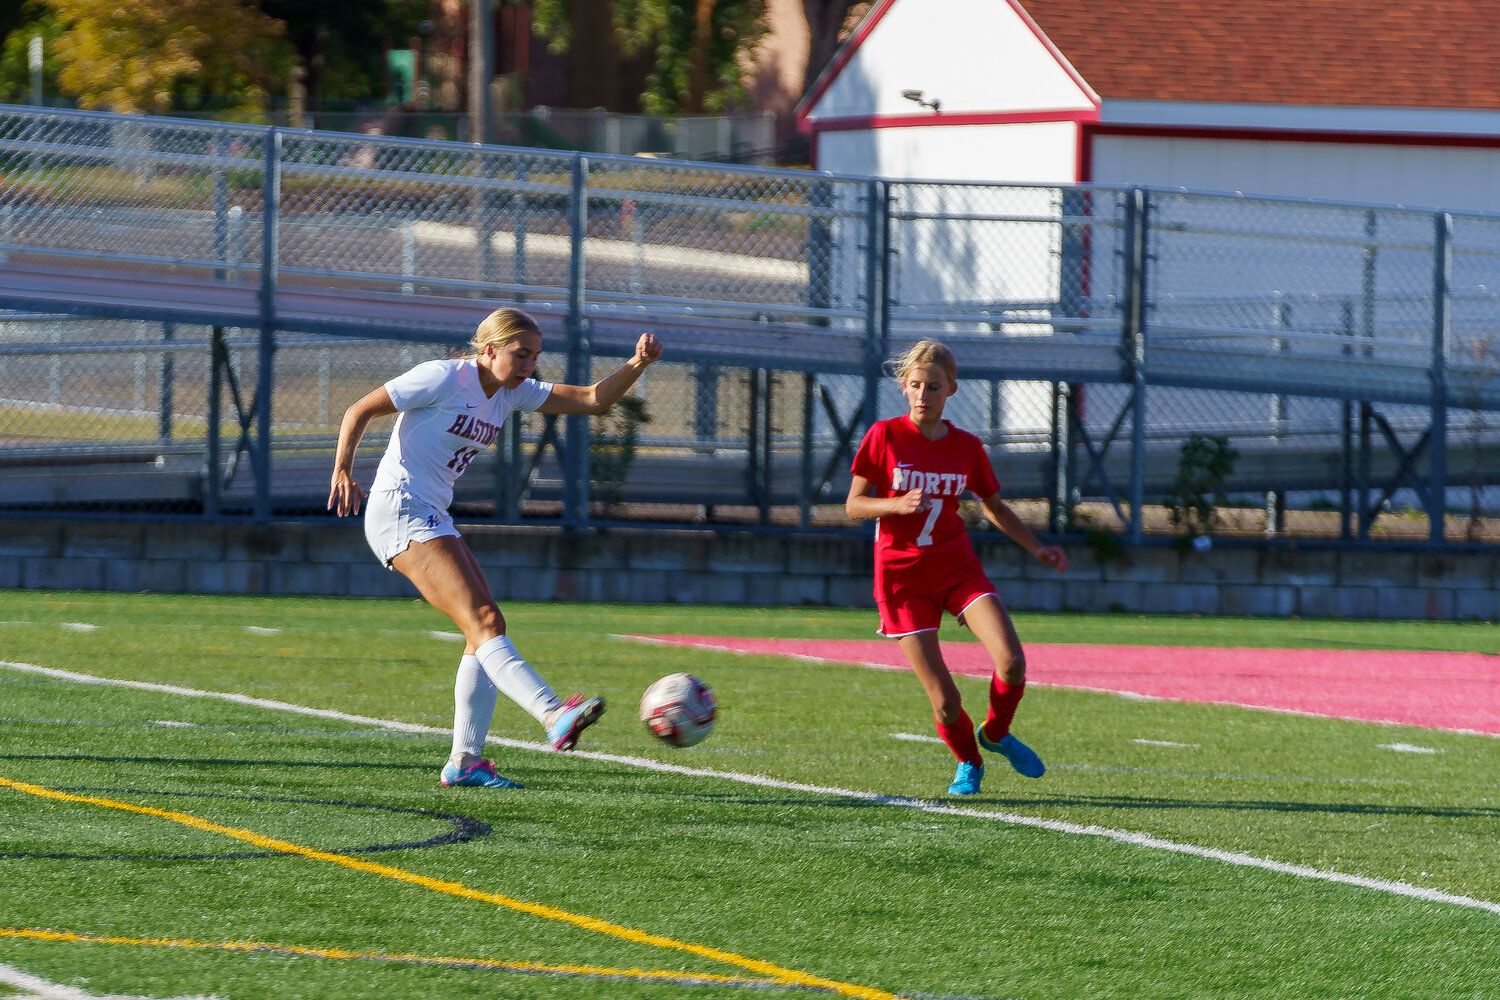 Ellie Magnus had one of 15 Raider goals. This was a pretty shot from about 20 yards out.